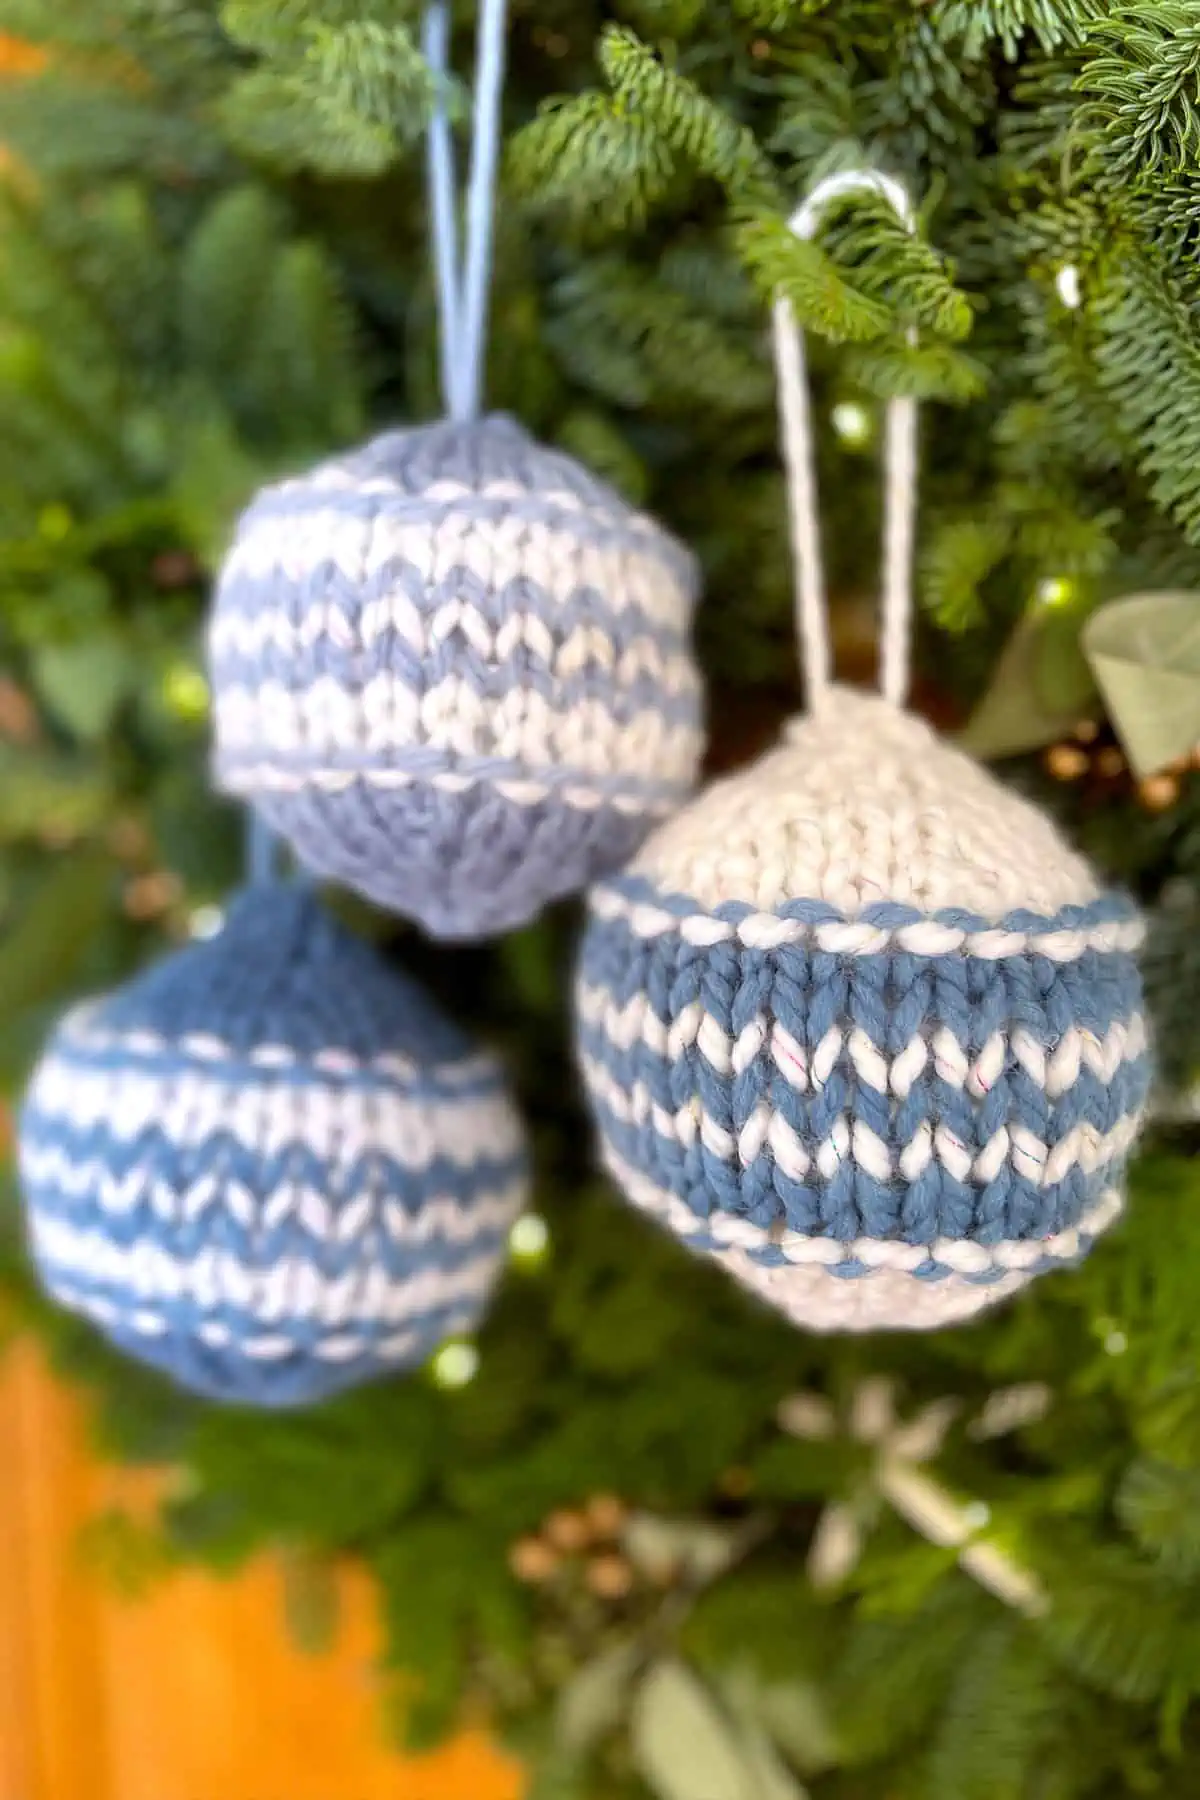 Knitted Christmas Balls in blue and white yarn colors hanging from greenery.